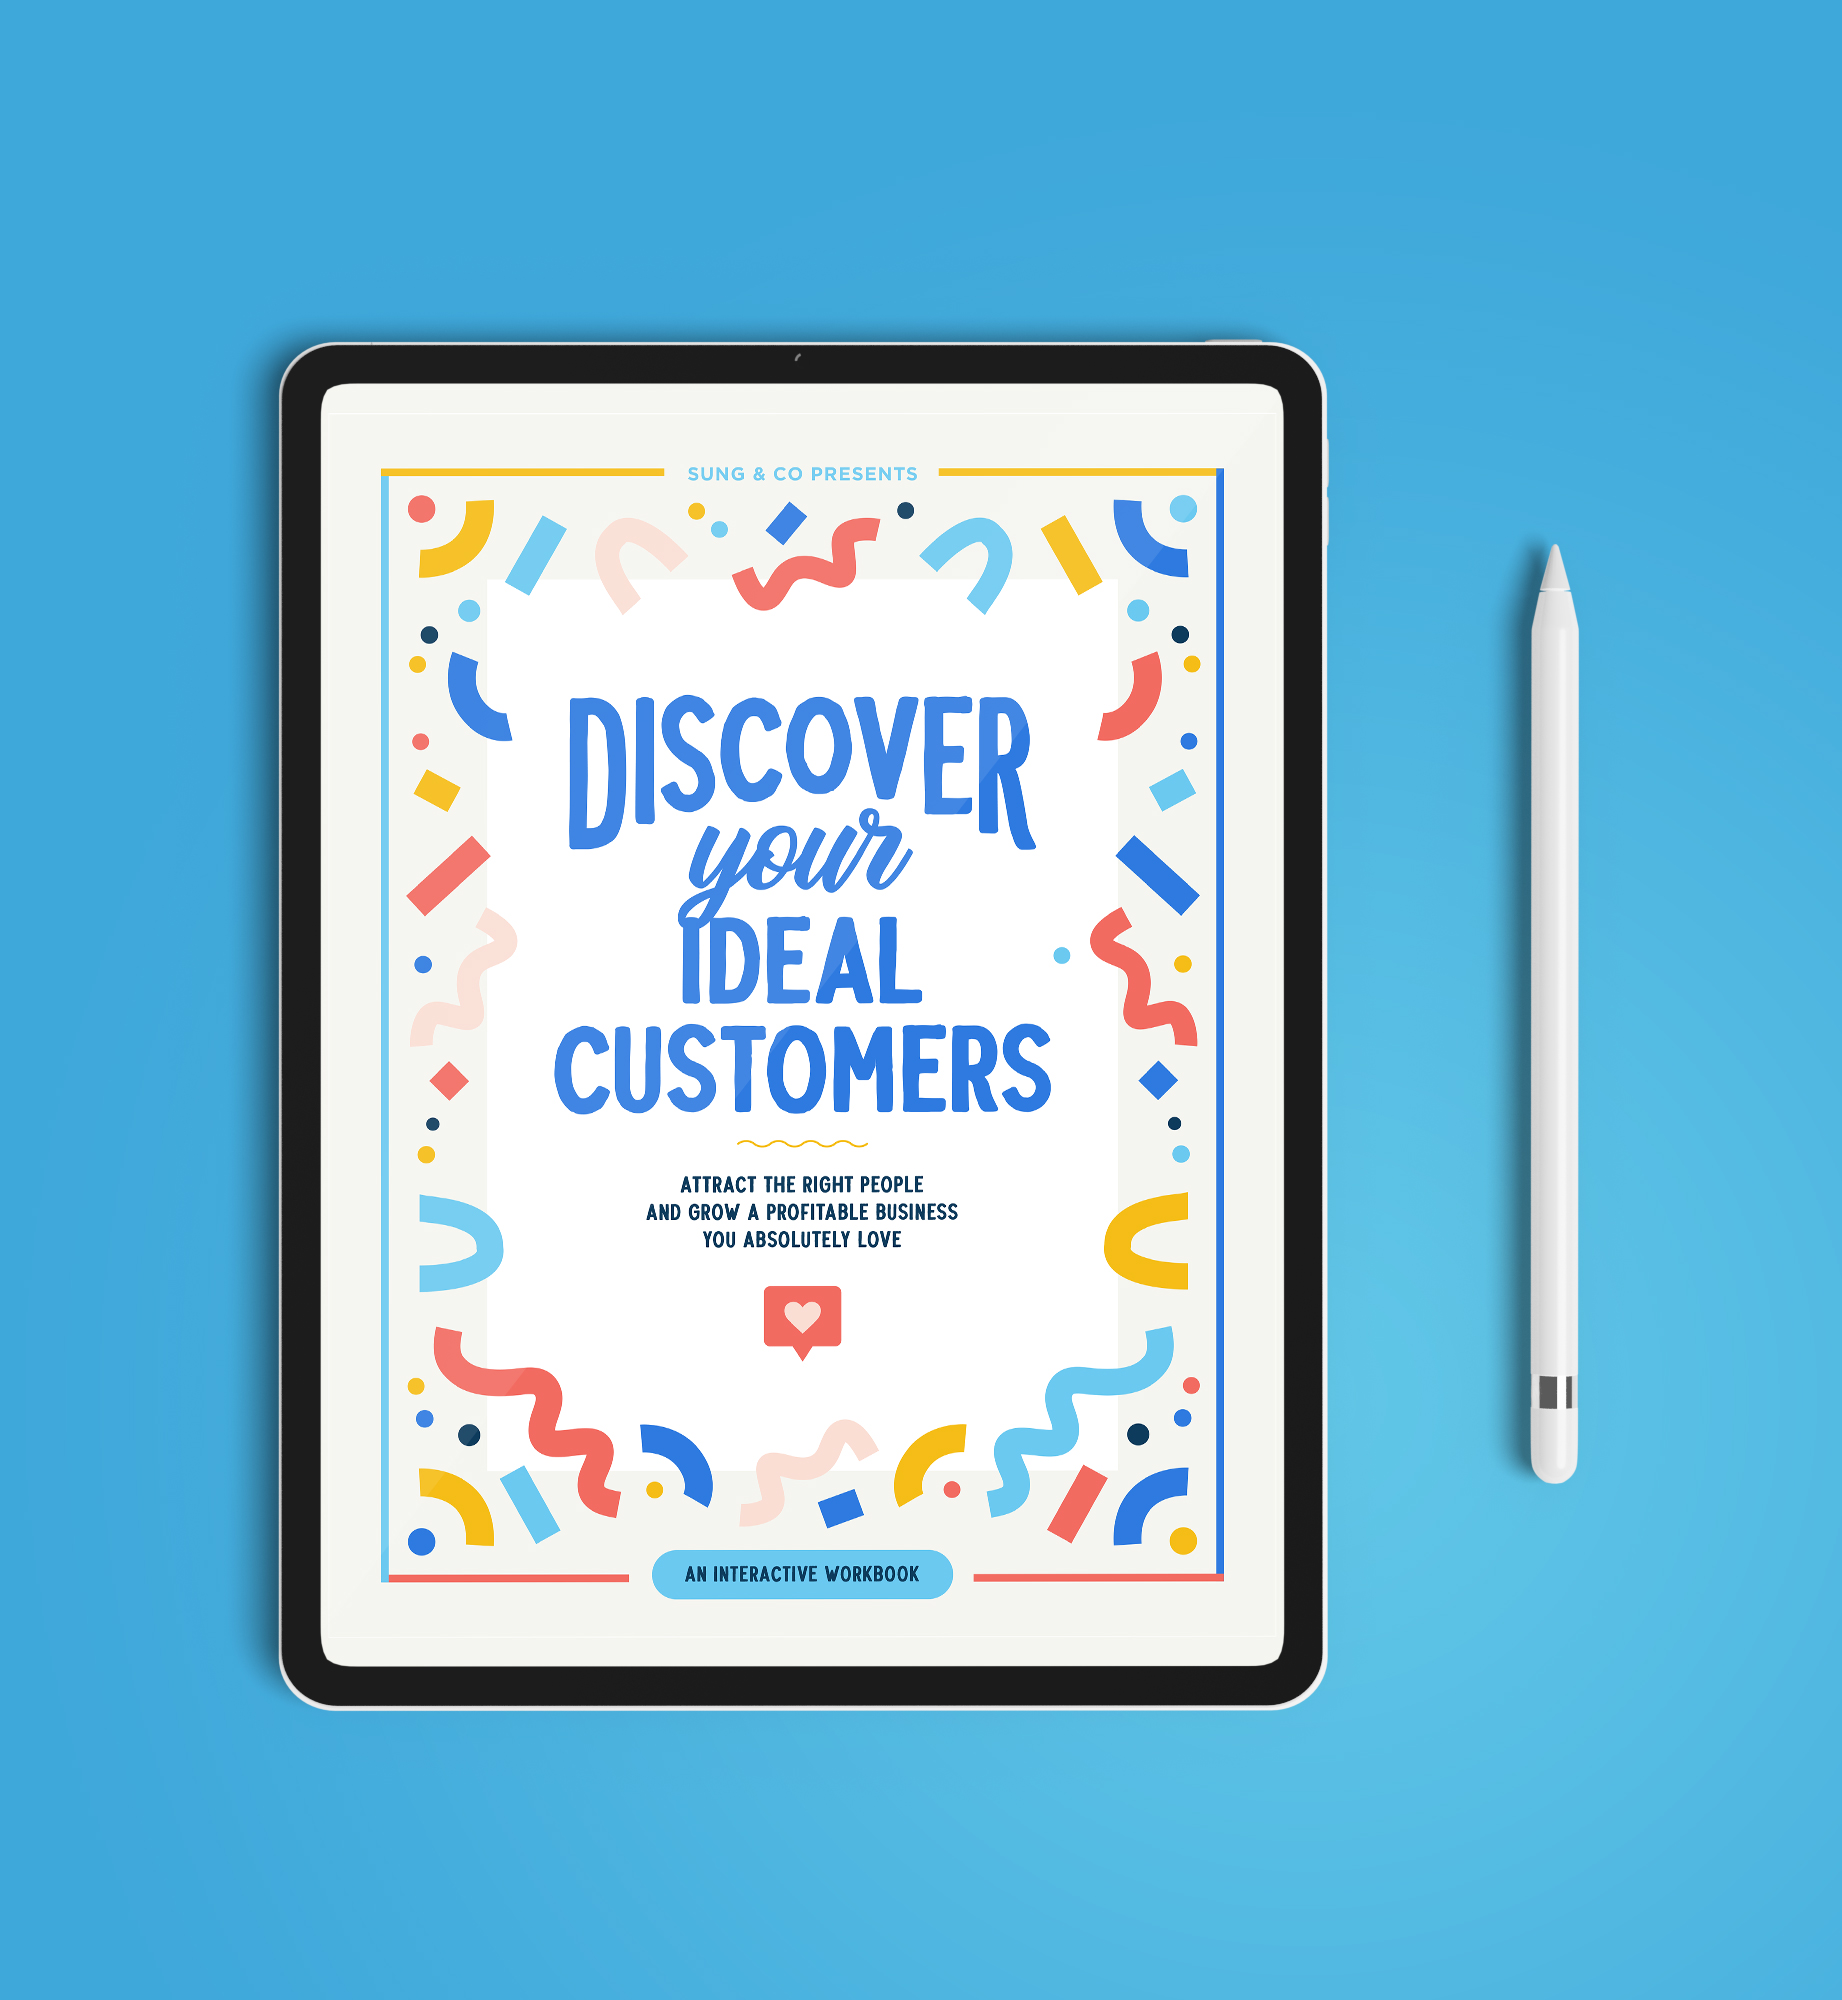 Discovery your ideal customers interactive workbook by Sung and Co.